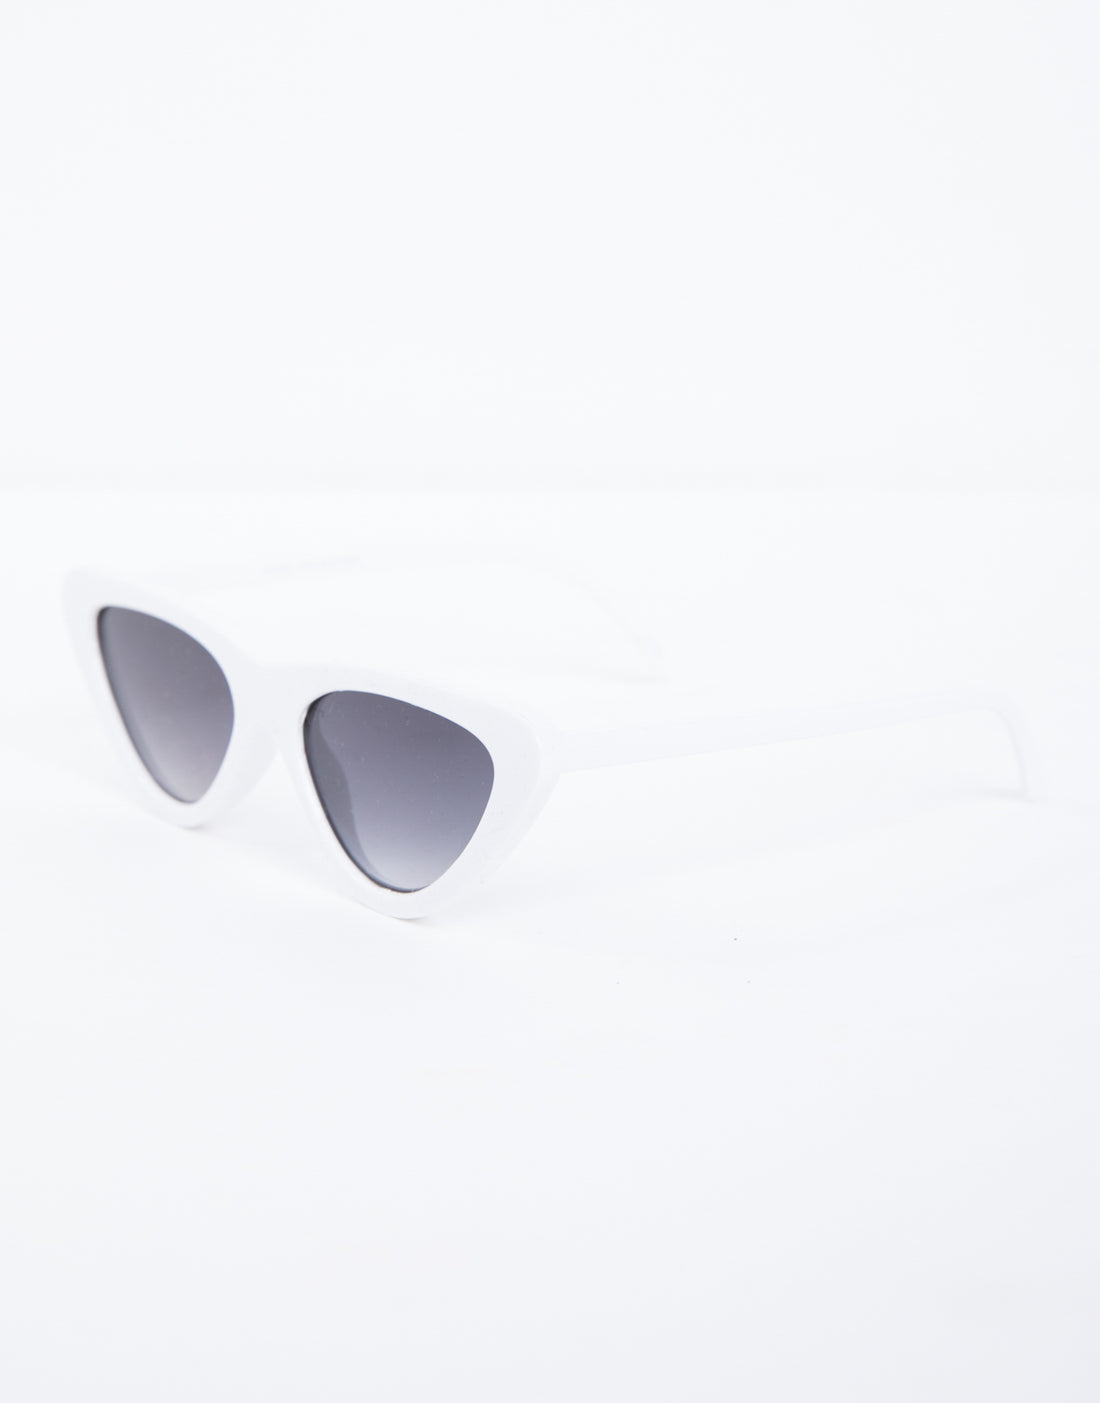 Center Of Attention Sunglasses Accessories White One Size -2020AVE